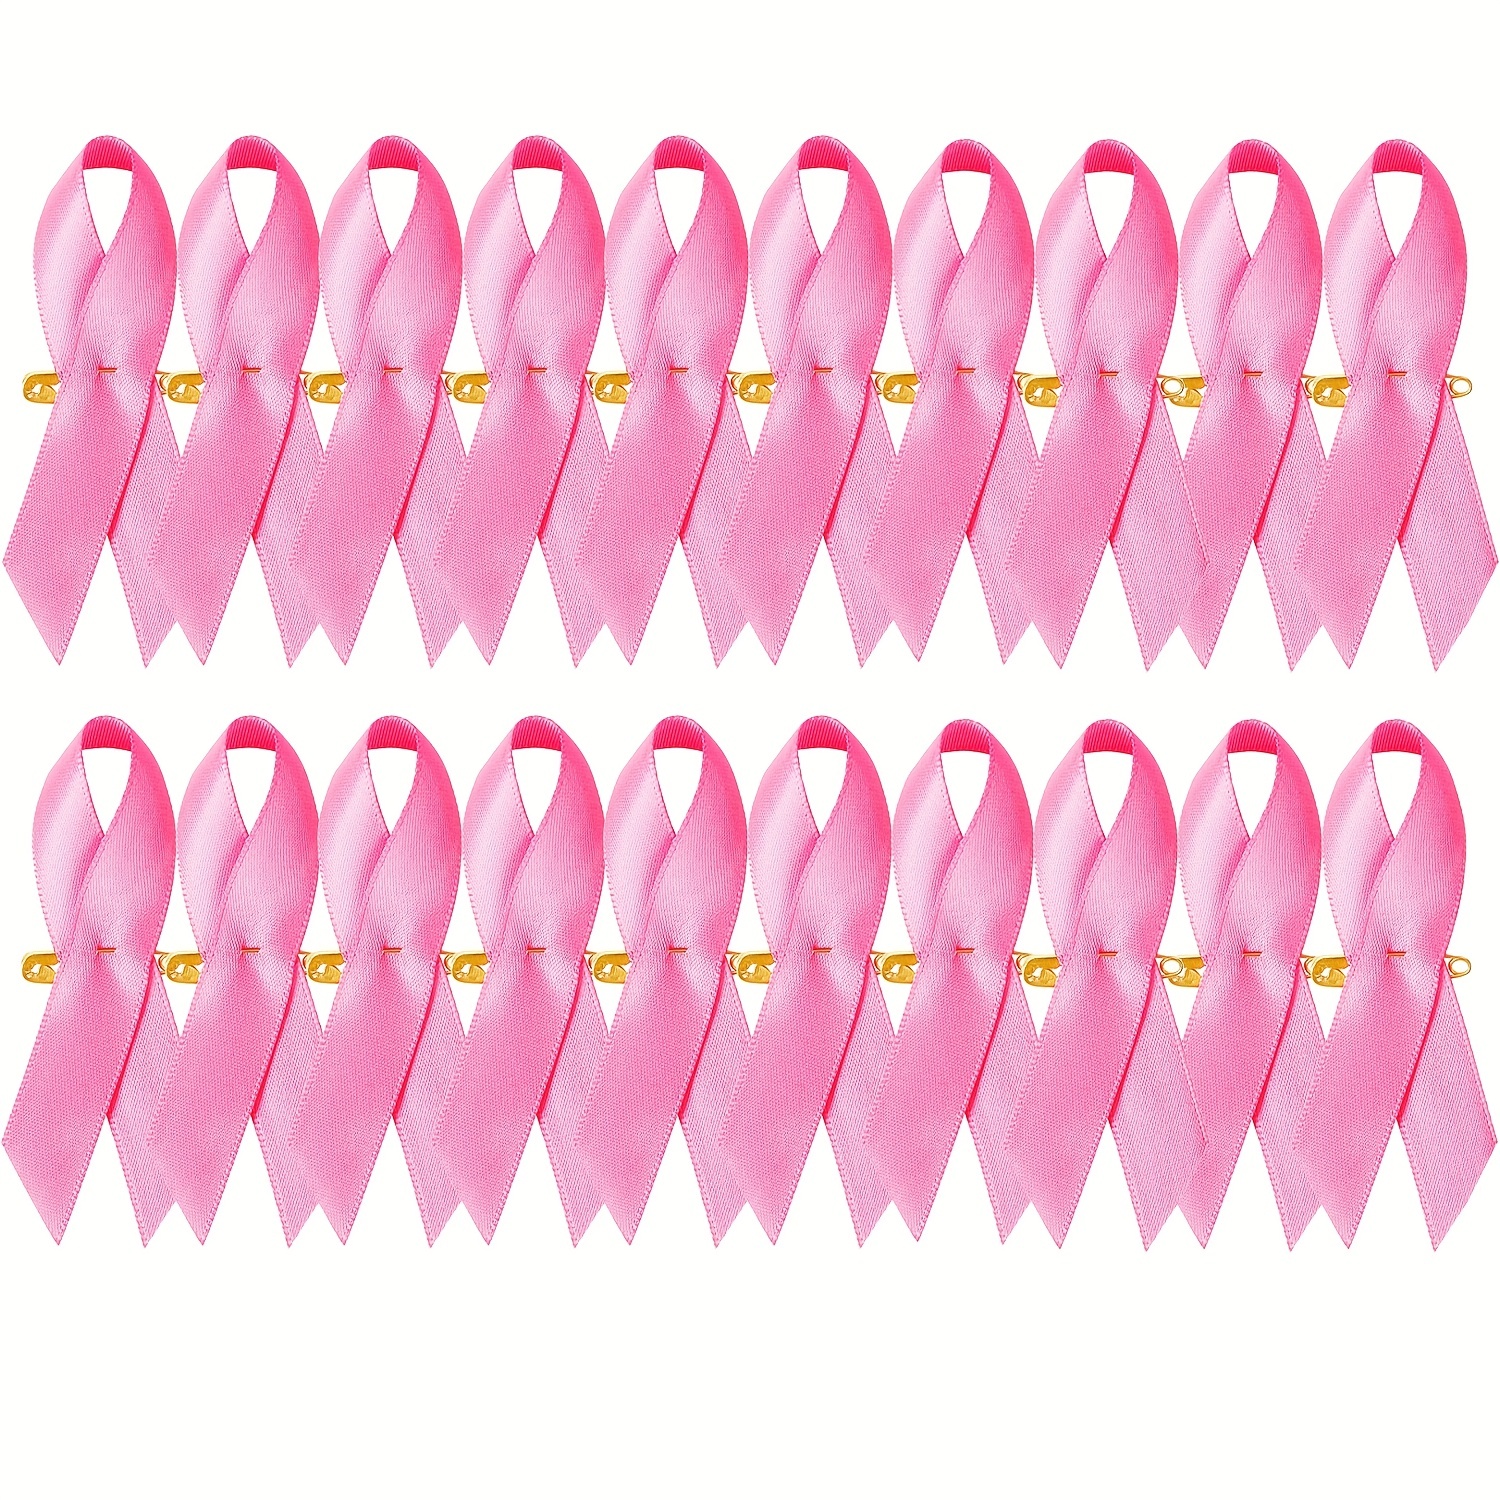 

20pcs, Breast Cancer Awareness Pink Ribbon Pin Breast Cancer Gifts For Women Girls Charity Public Social Event Public Welfare Party Supplies Memorials Activity